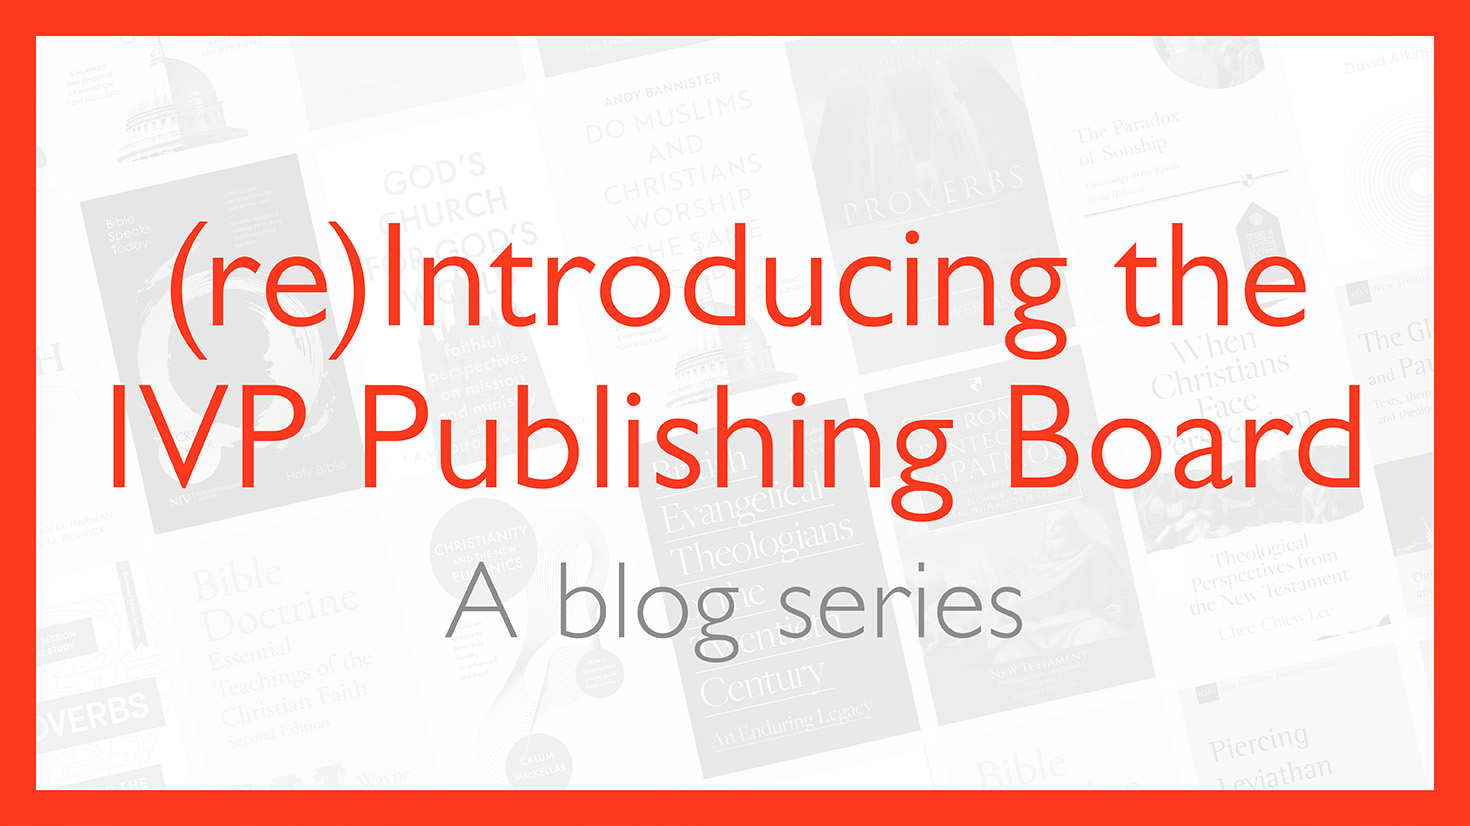 Blog Series: (re)Introducing the IVP Publishing Board